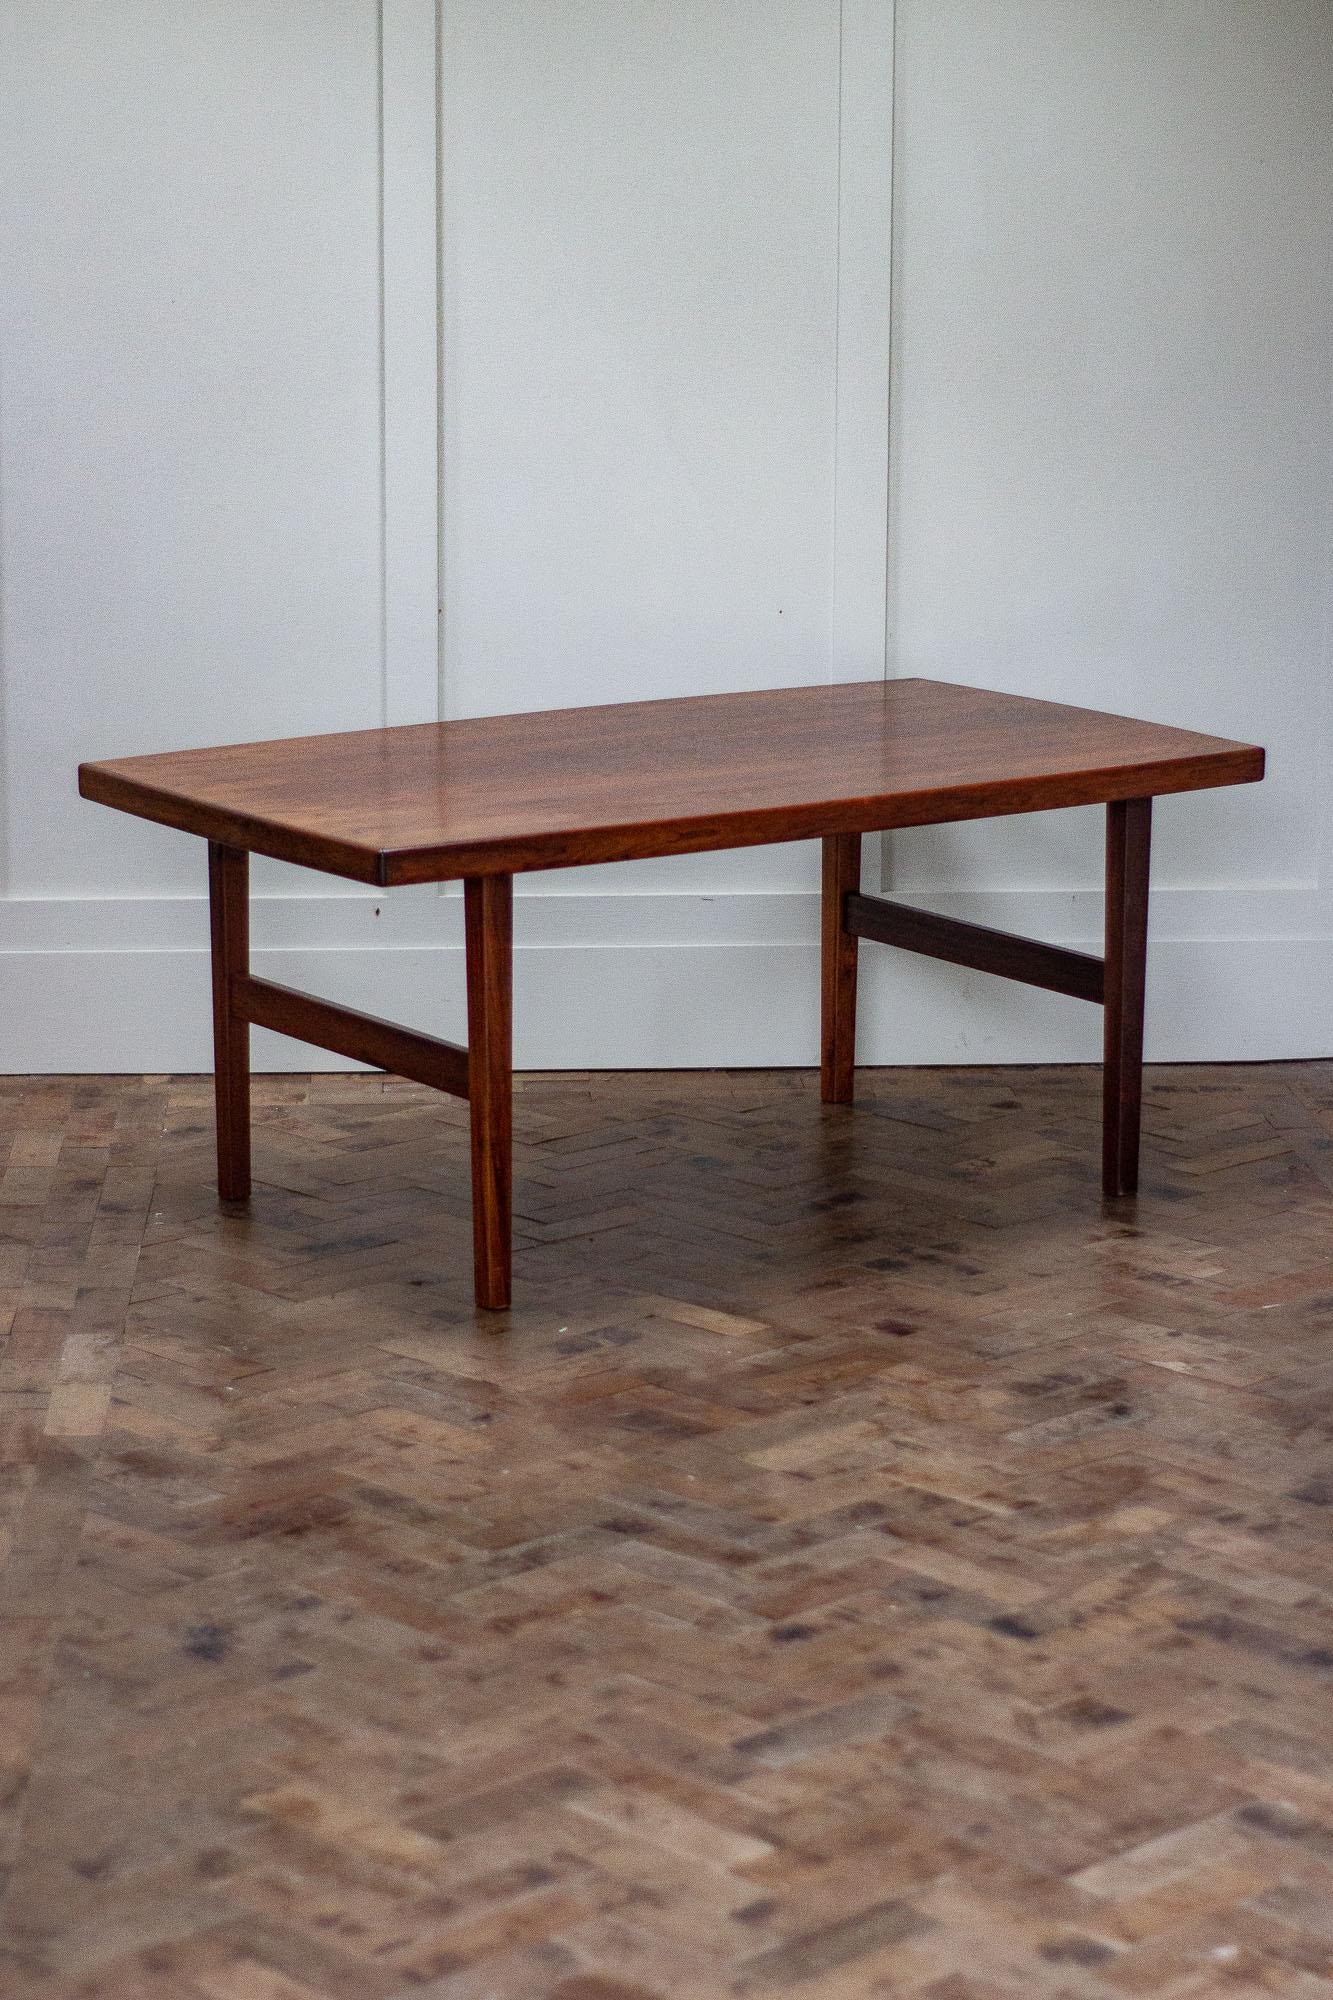 Coffee table in rosewood of Danish design and of Danish cabinet makers quality, circa 1960s.

The table legs can be removed for easy transport and the top has bowed edges to all sides which gives a great look.
   